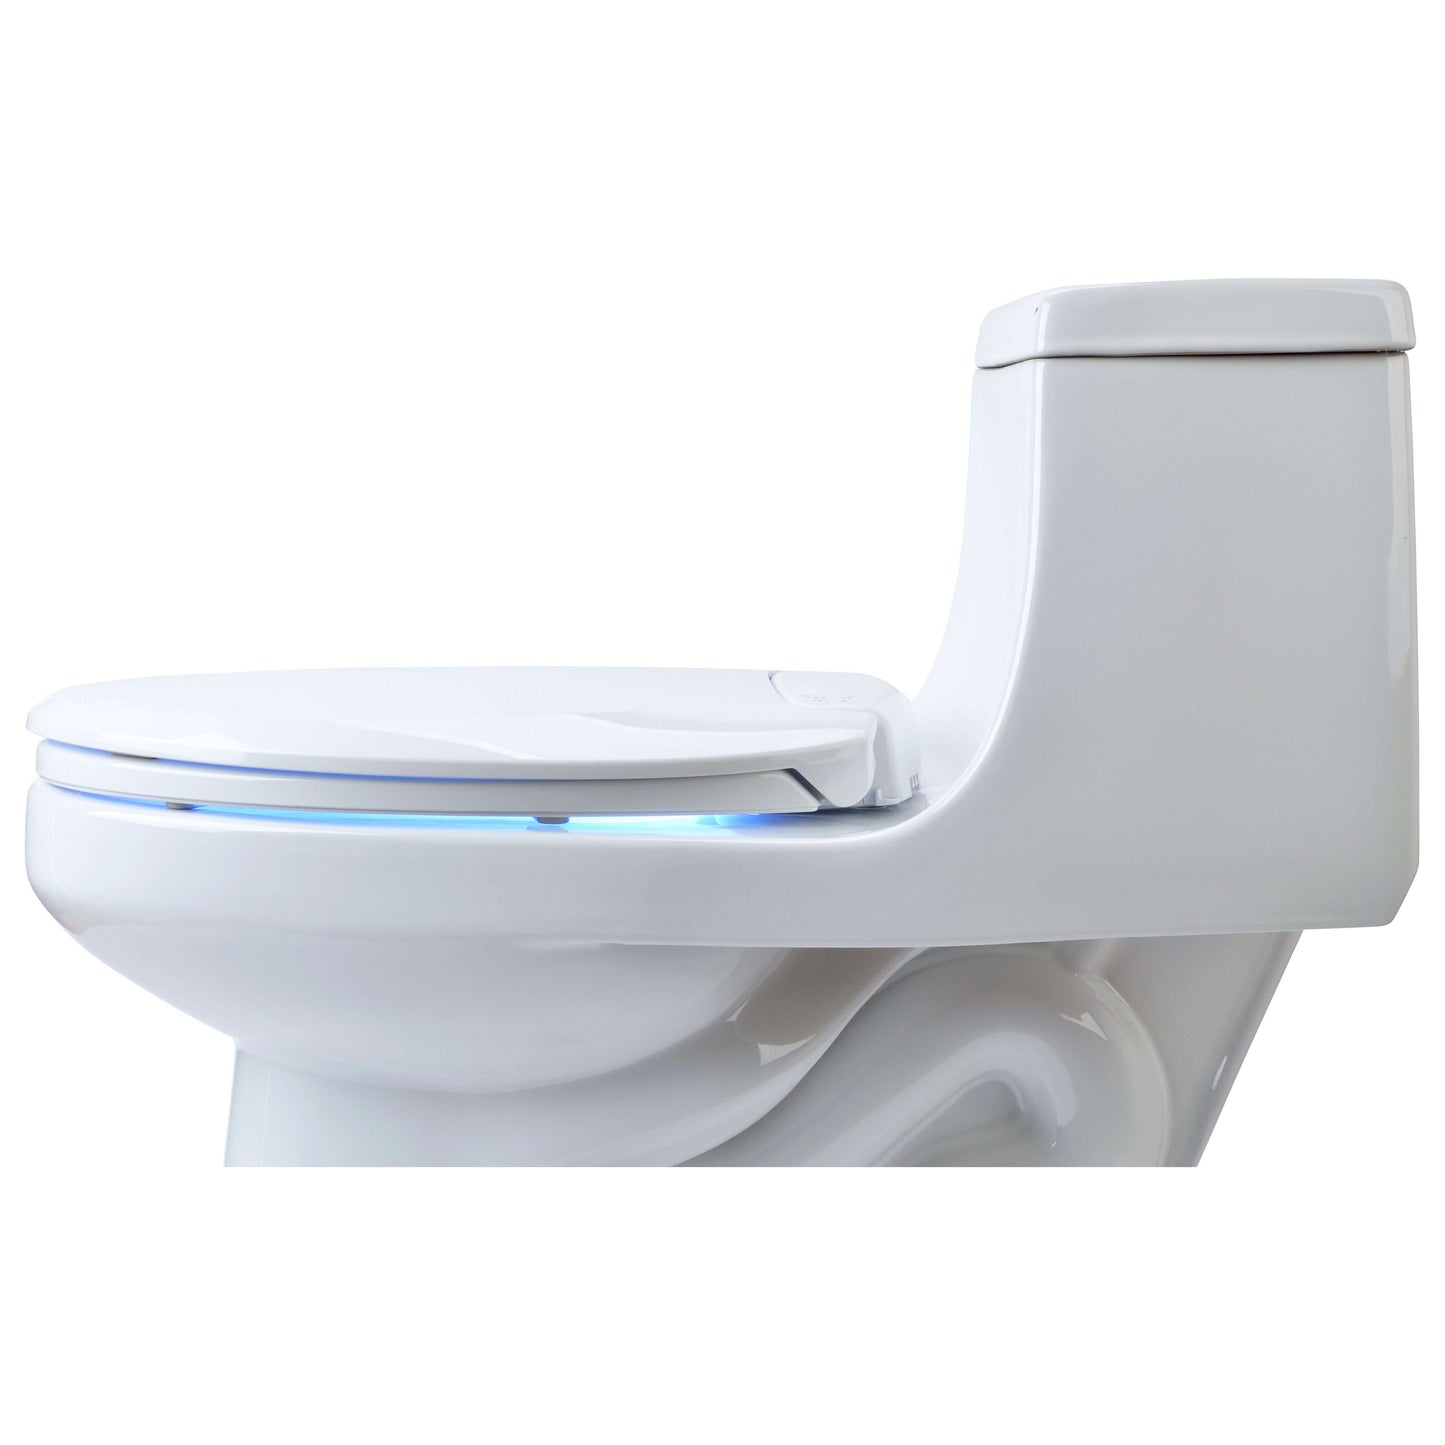 LumaWarm Heated Nightlight Toilet Seat - side view attached to a toilet